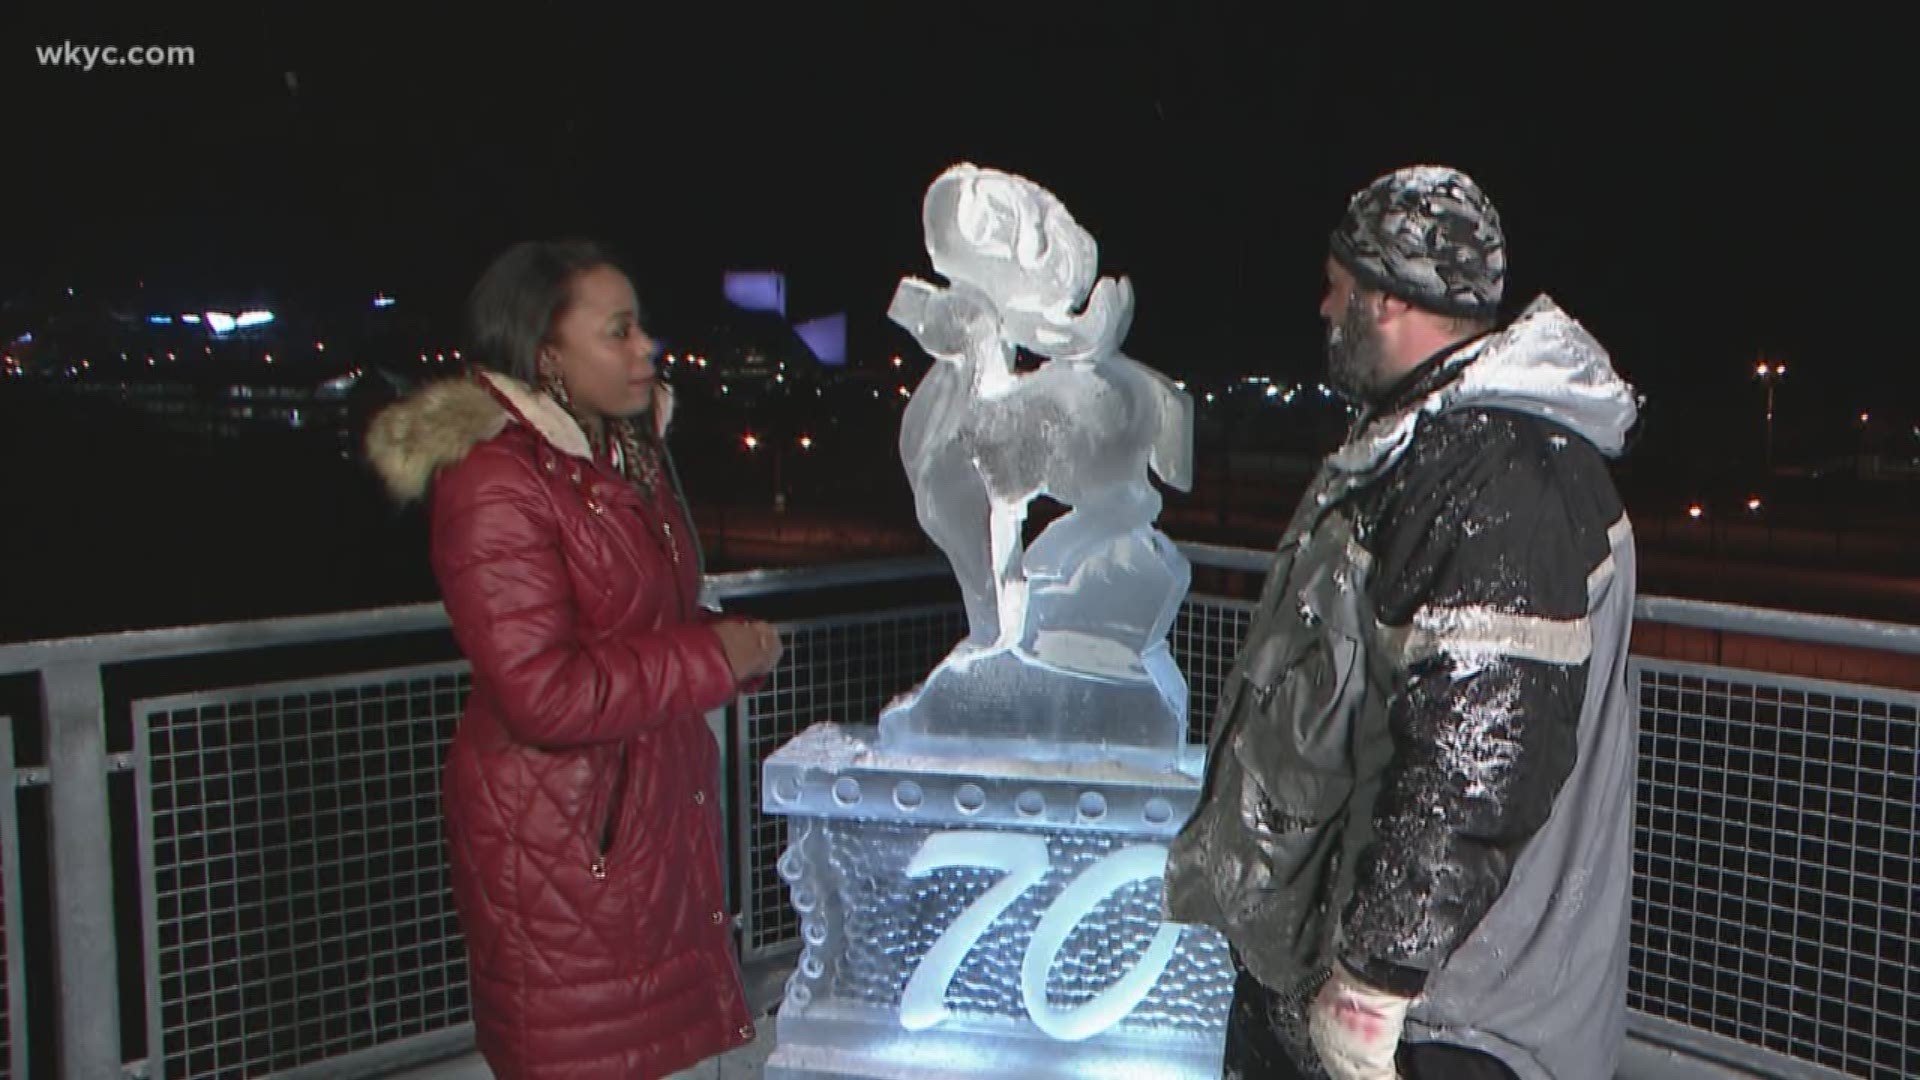 Dec. 5, 2018: An ice sculptor with Elegant Ice Creations showed us what kind of skill it takes to craft art out of ice.